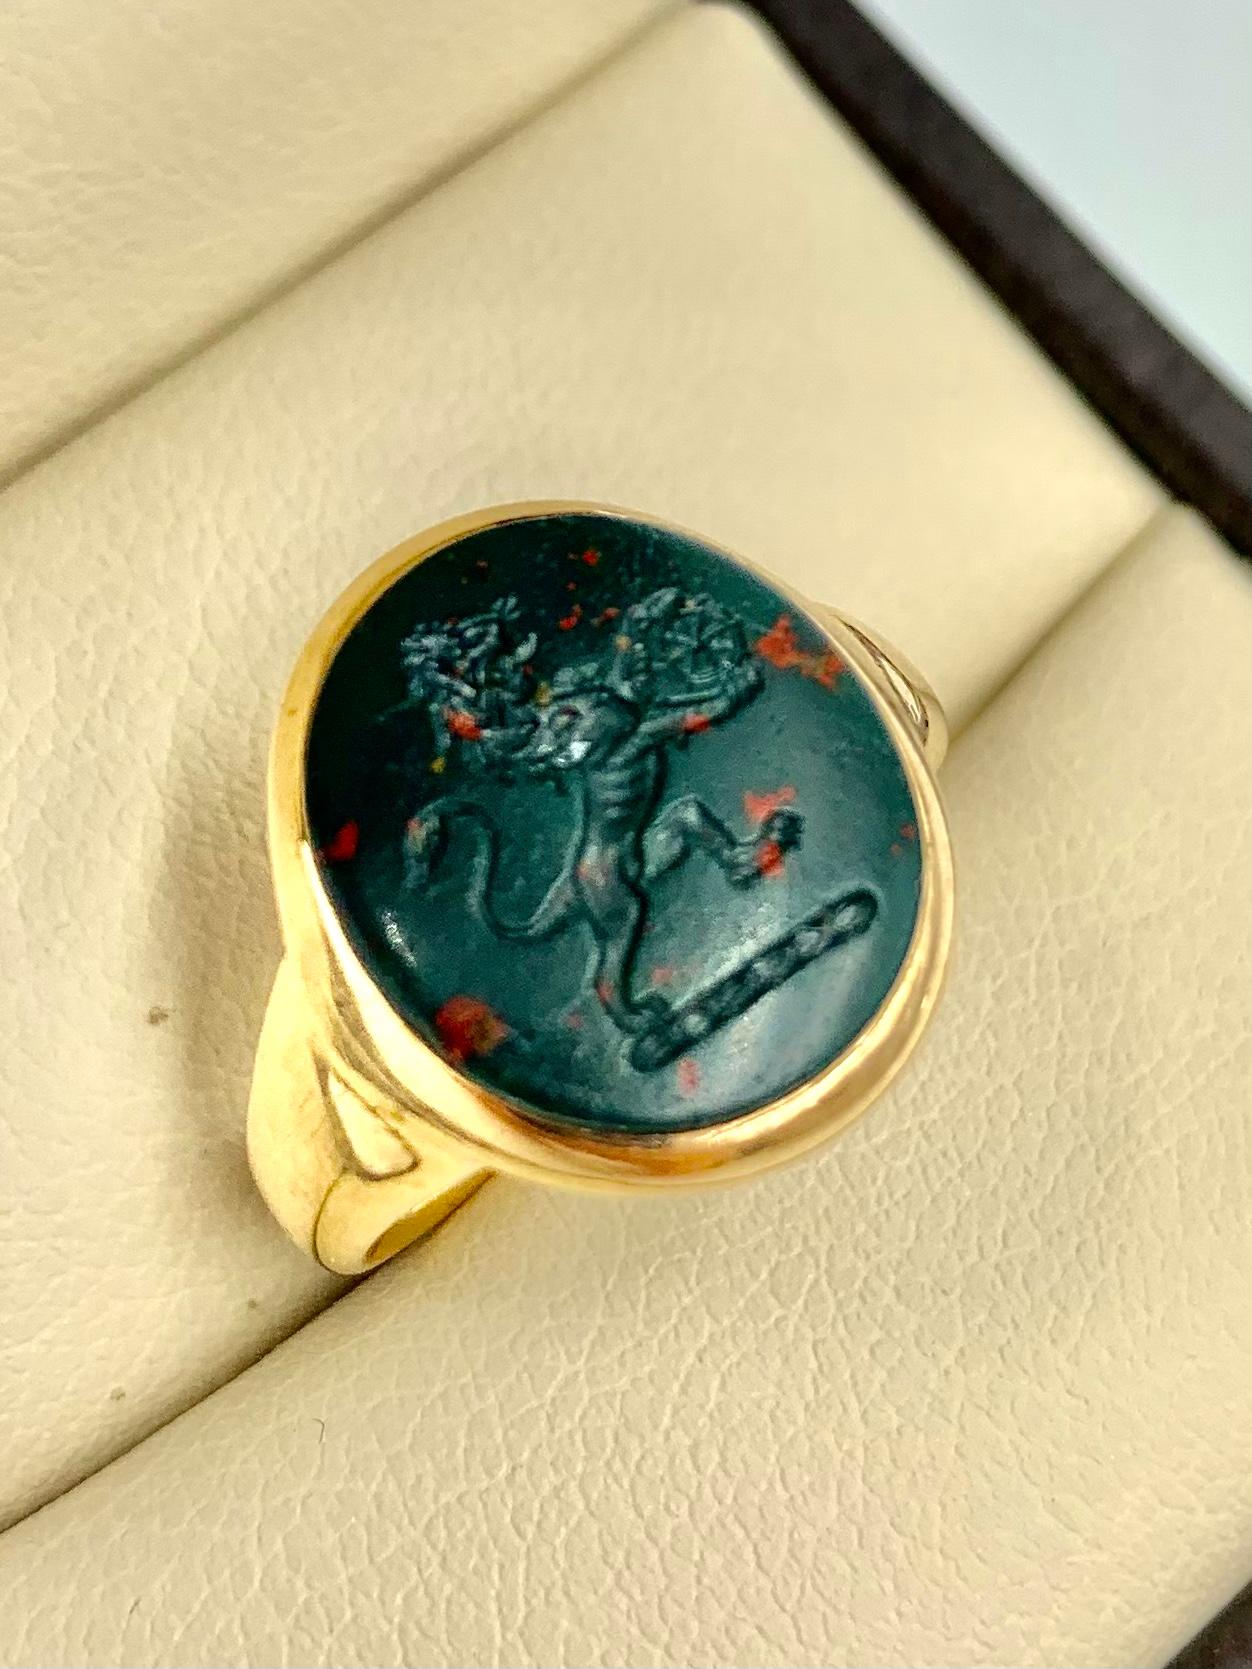 Beautiful Georgian period gold signet ring with a bloodstone intaglio crest of a lion passant holding the wheel of fortune. The bloodstone with lovely old patina and great detail, curved on the back for a wonderful fit on the finger. The lion is the